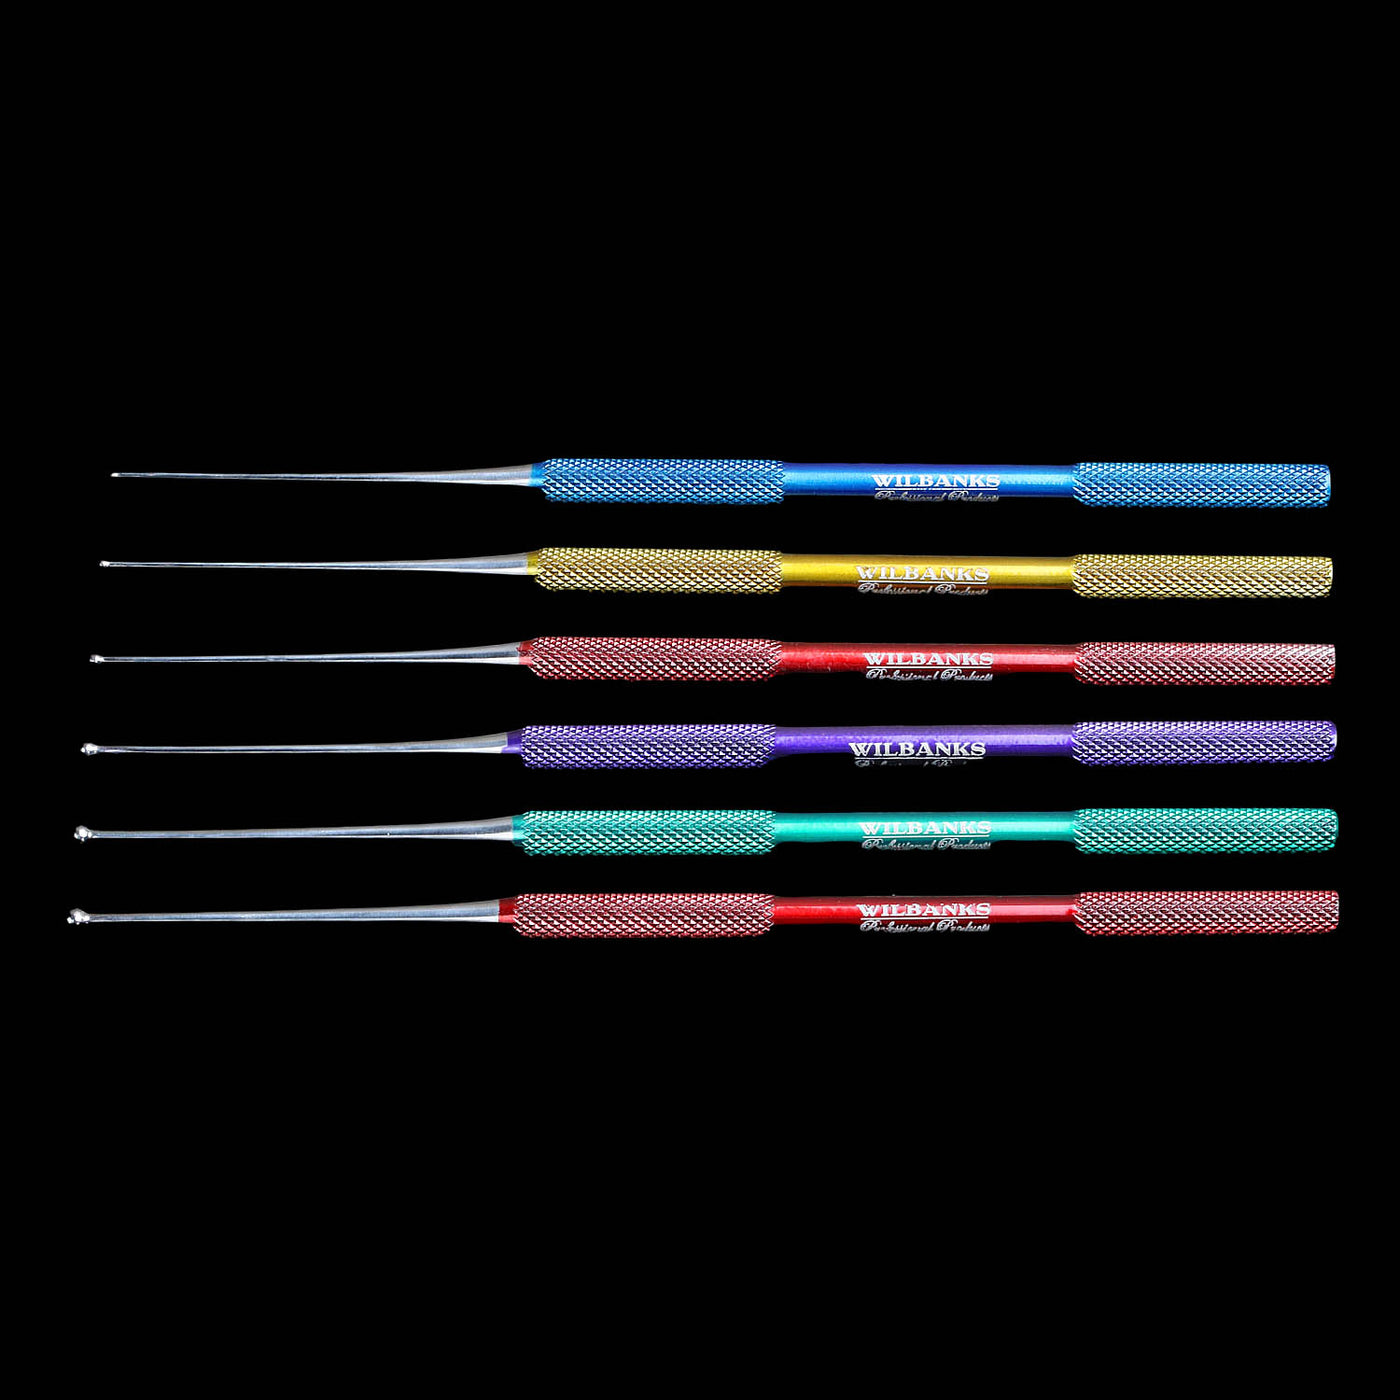 Wilbanks Professional Sexing Probe Set